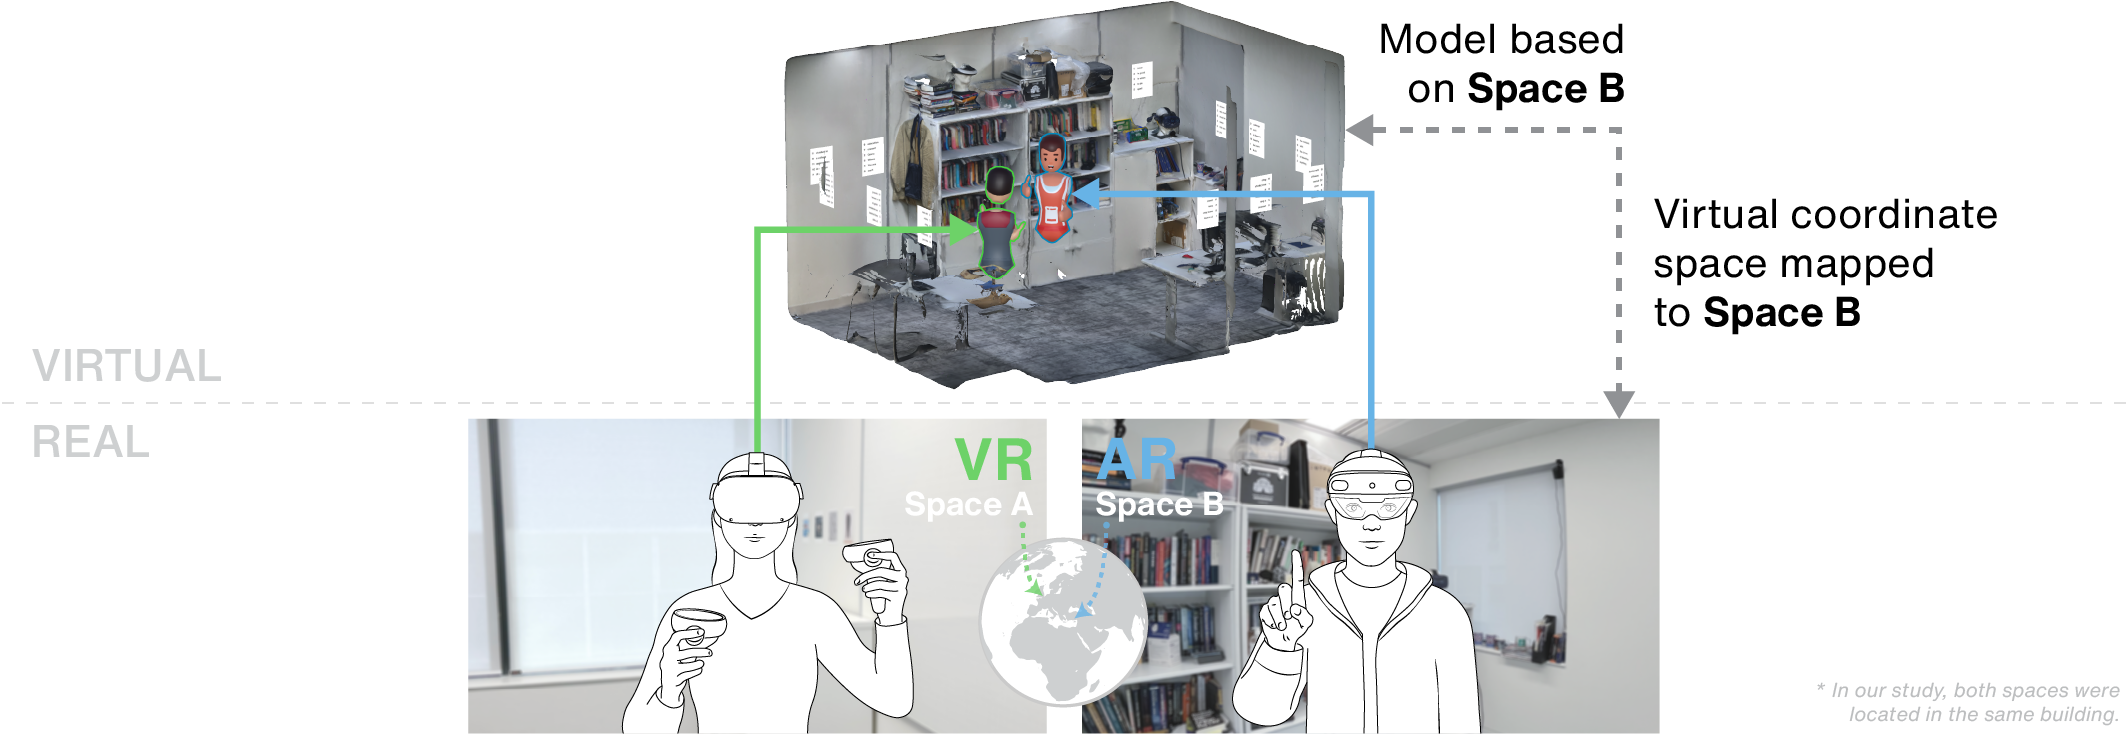 Conceptual overview of our collaborative MR system, in which an AR and a VR user can collaborate remotely. The CVE contains a static 3D model of Space B. Users are represented with avatars. Line illustrations by Suhyun Park (artist).